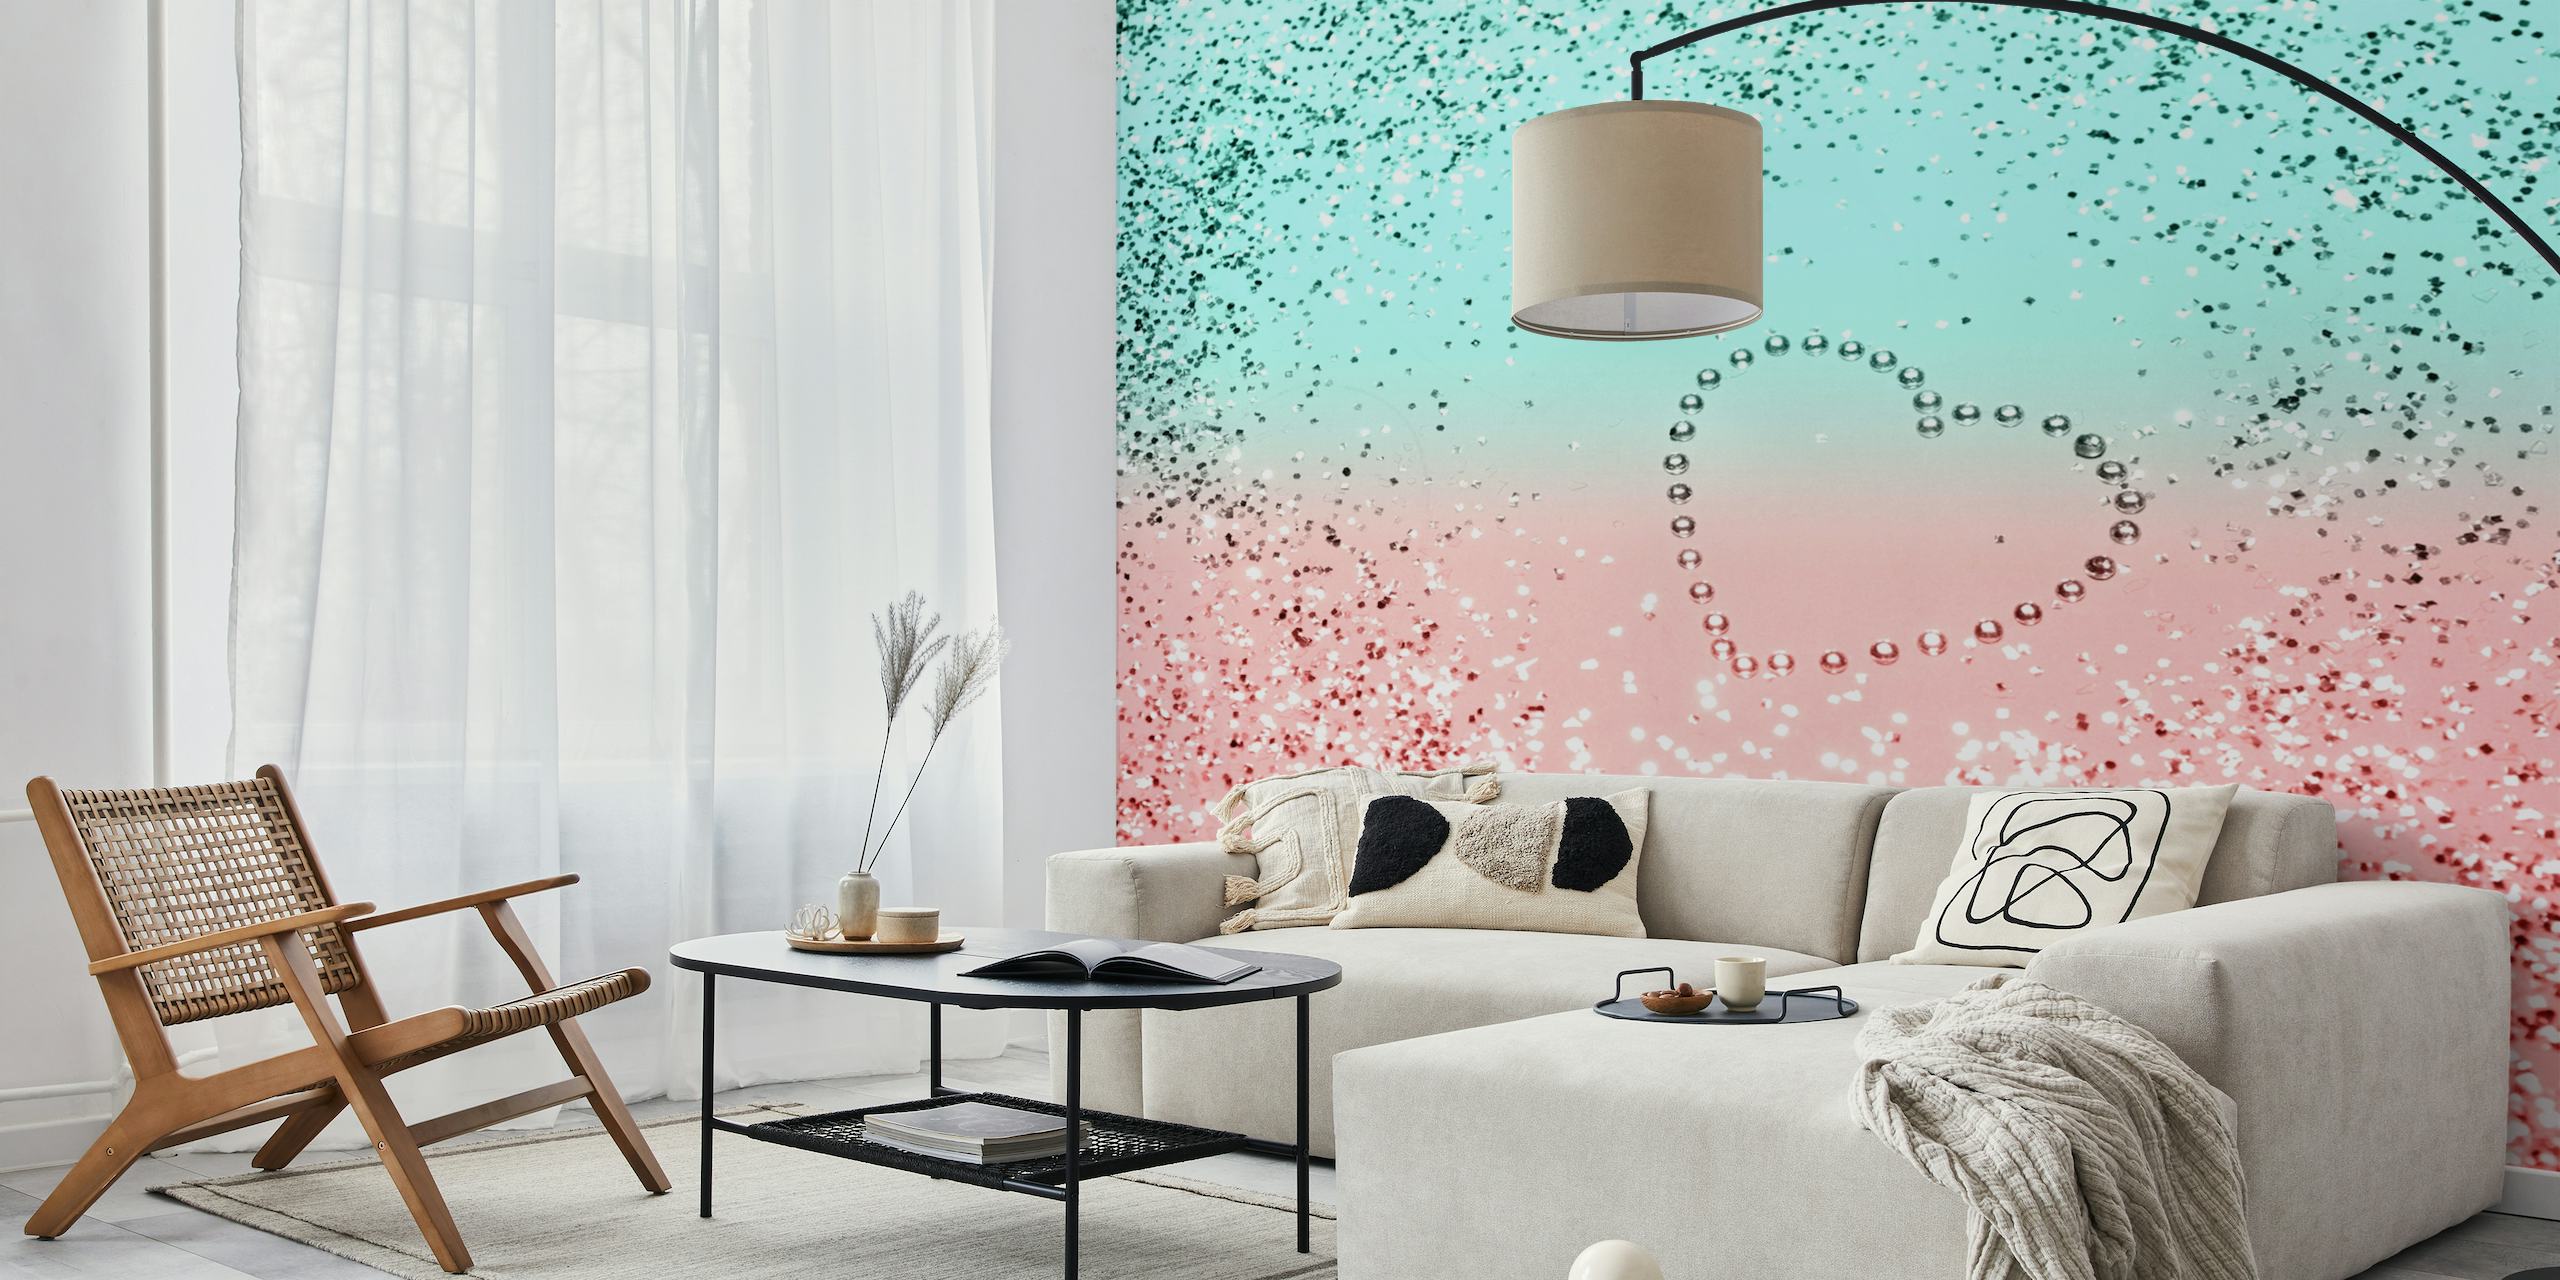 Summer Glitter Heart wall mural with a gradient from aqua blue to pink with a sparkling effect